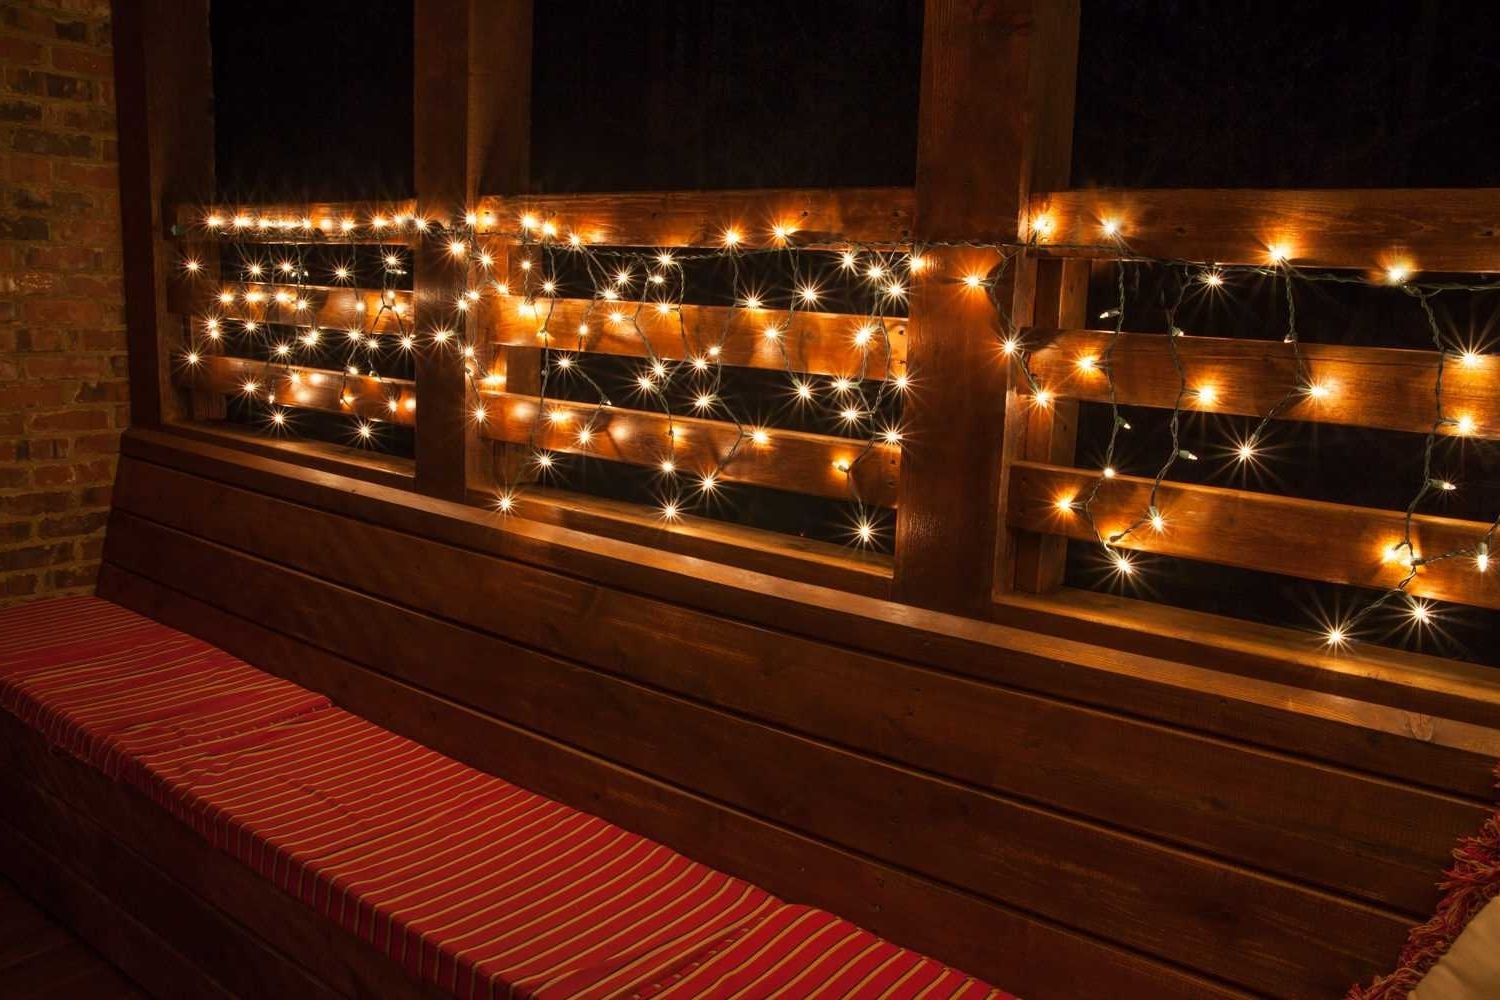 Most Recent Outdoor Hanging Deck Lights Intended For Awesome Outdoor Deck String Lighting Inspirations With Ideas (View 1 of 20)